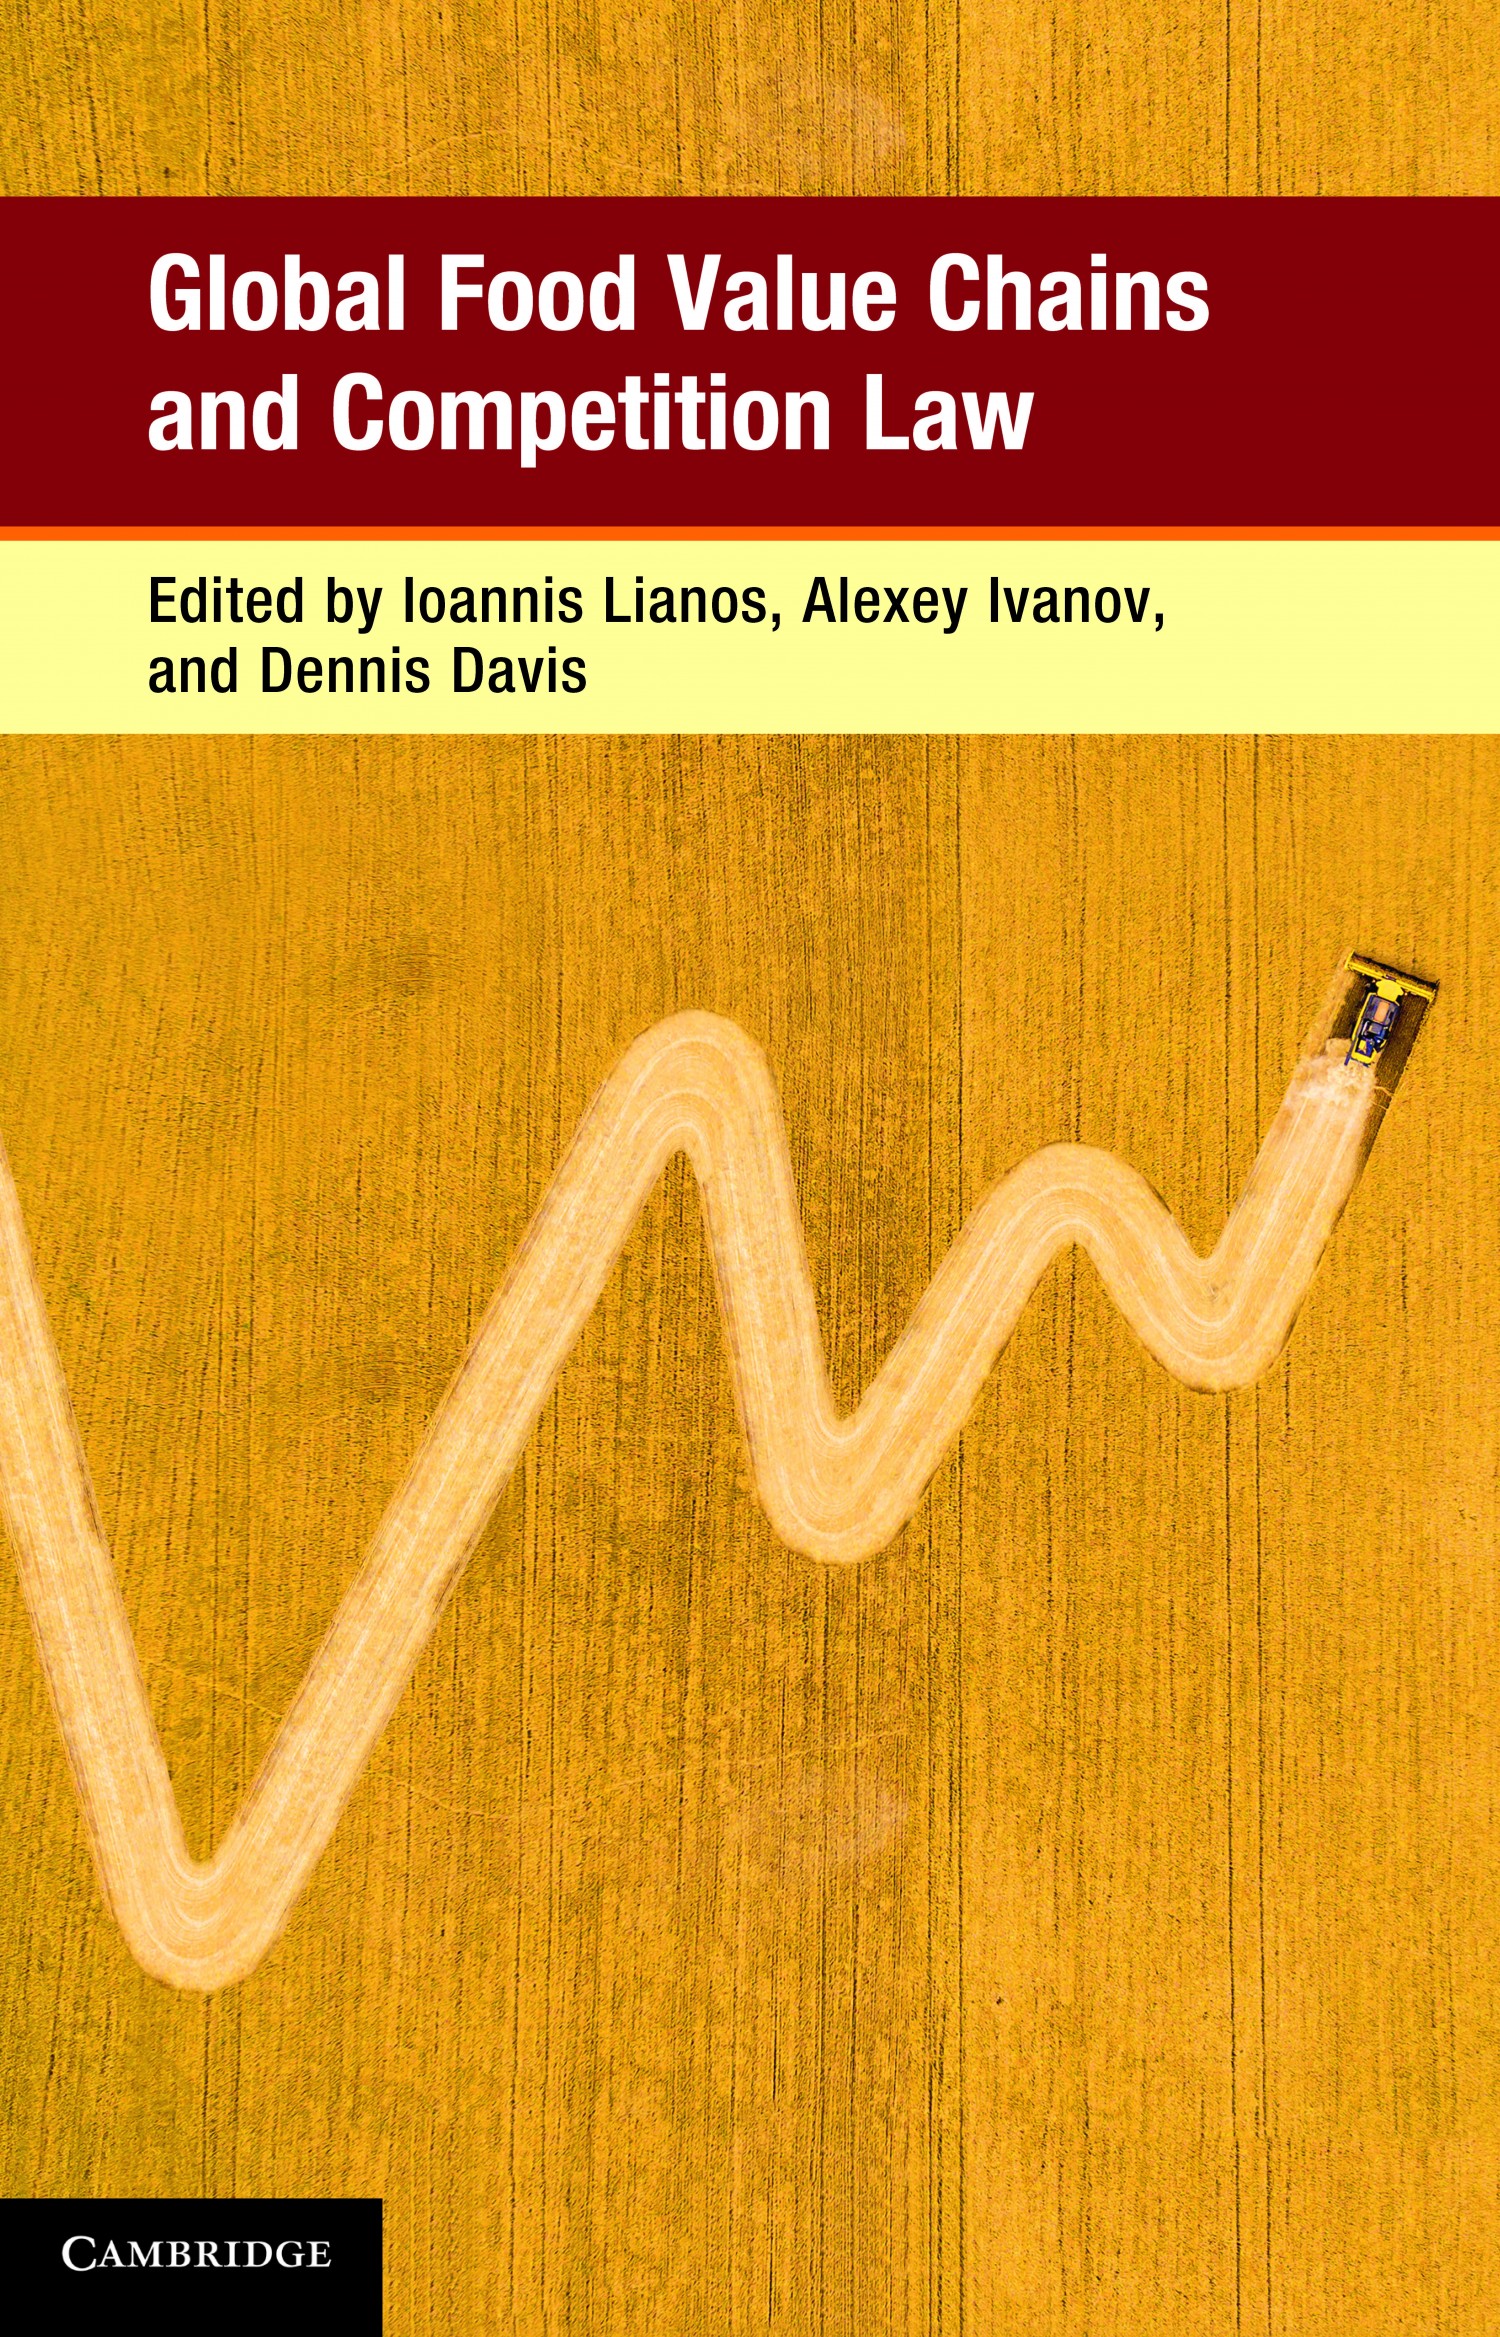 Global Food Value Chains and Competition Law: Book Launch 